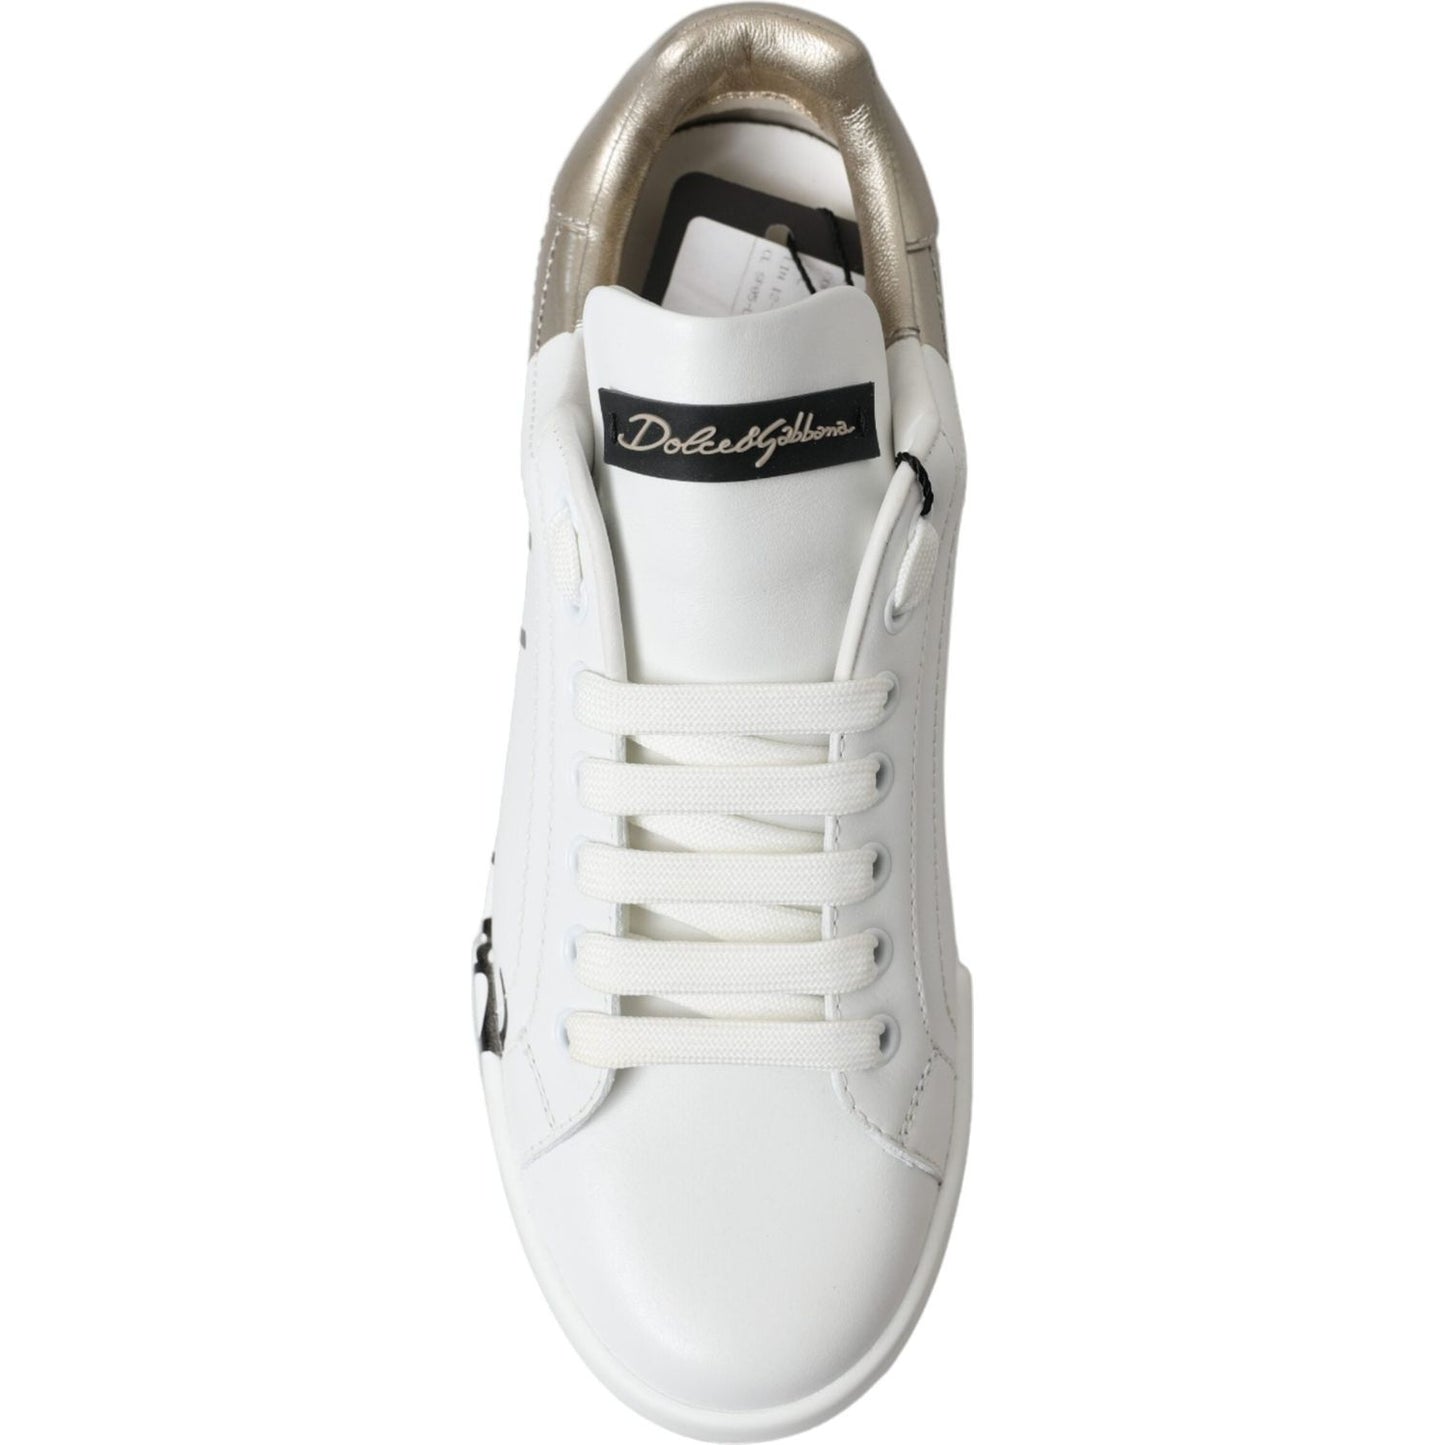 Dolce & Gabbana Elegant White & Gold Leather Sneakers white-gold-lace-up-womens-low-top-sneakers 465A2625-BG-scaled-06d49b39-965.jpg